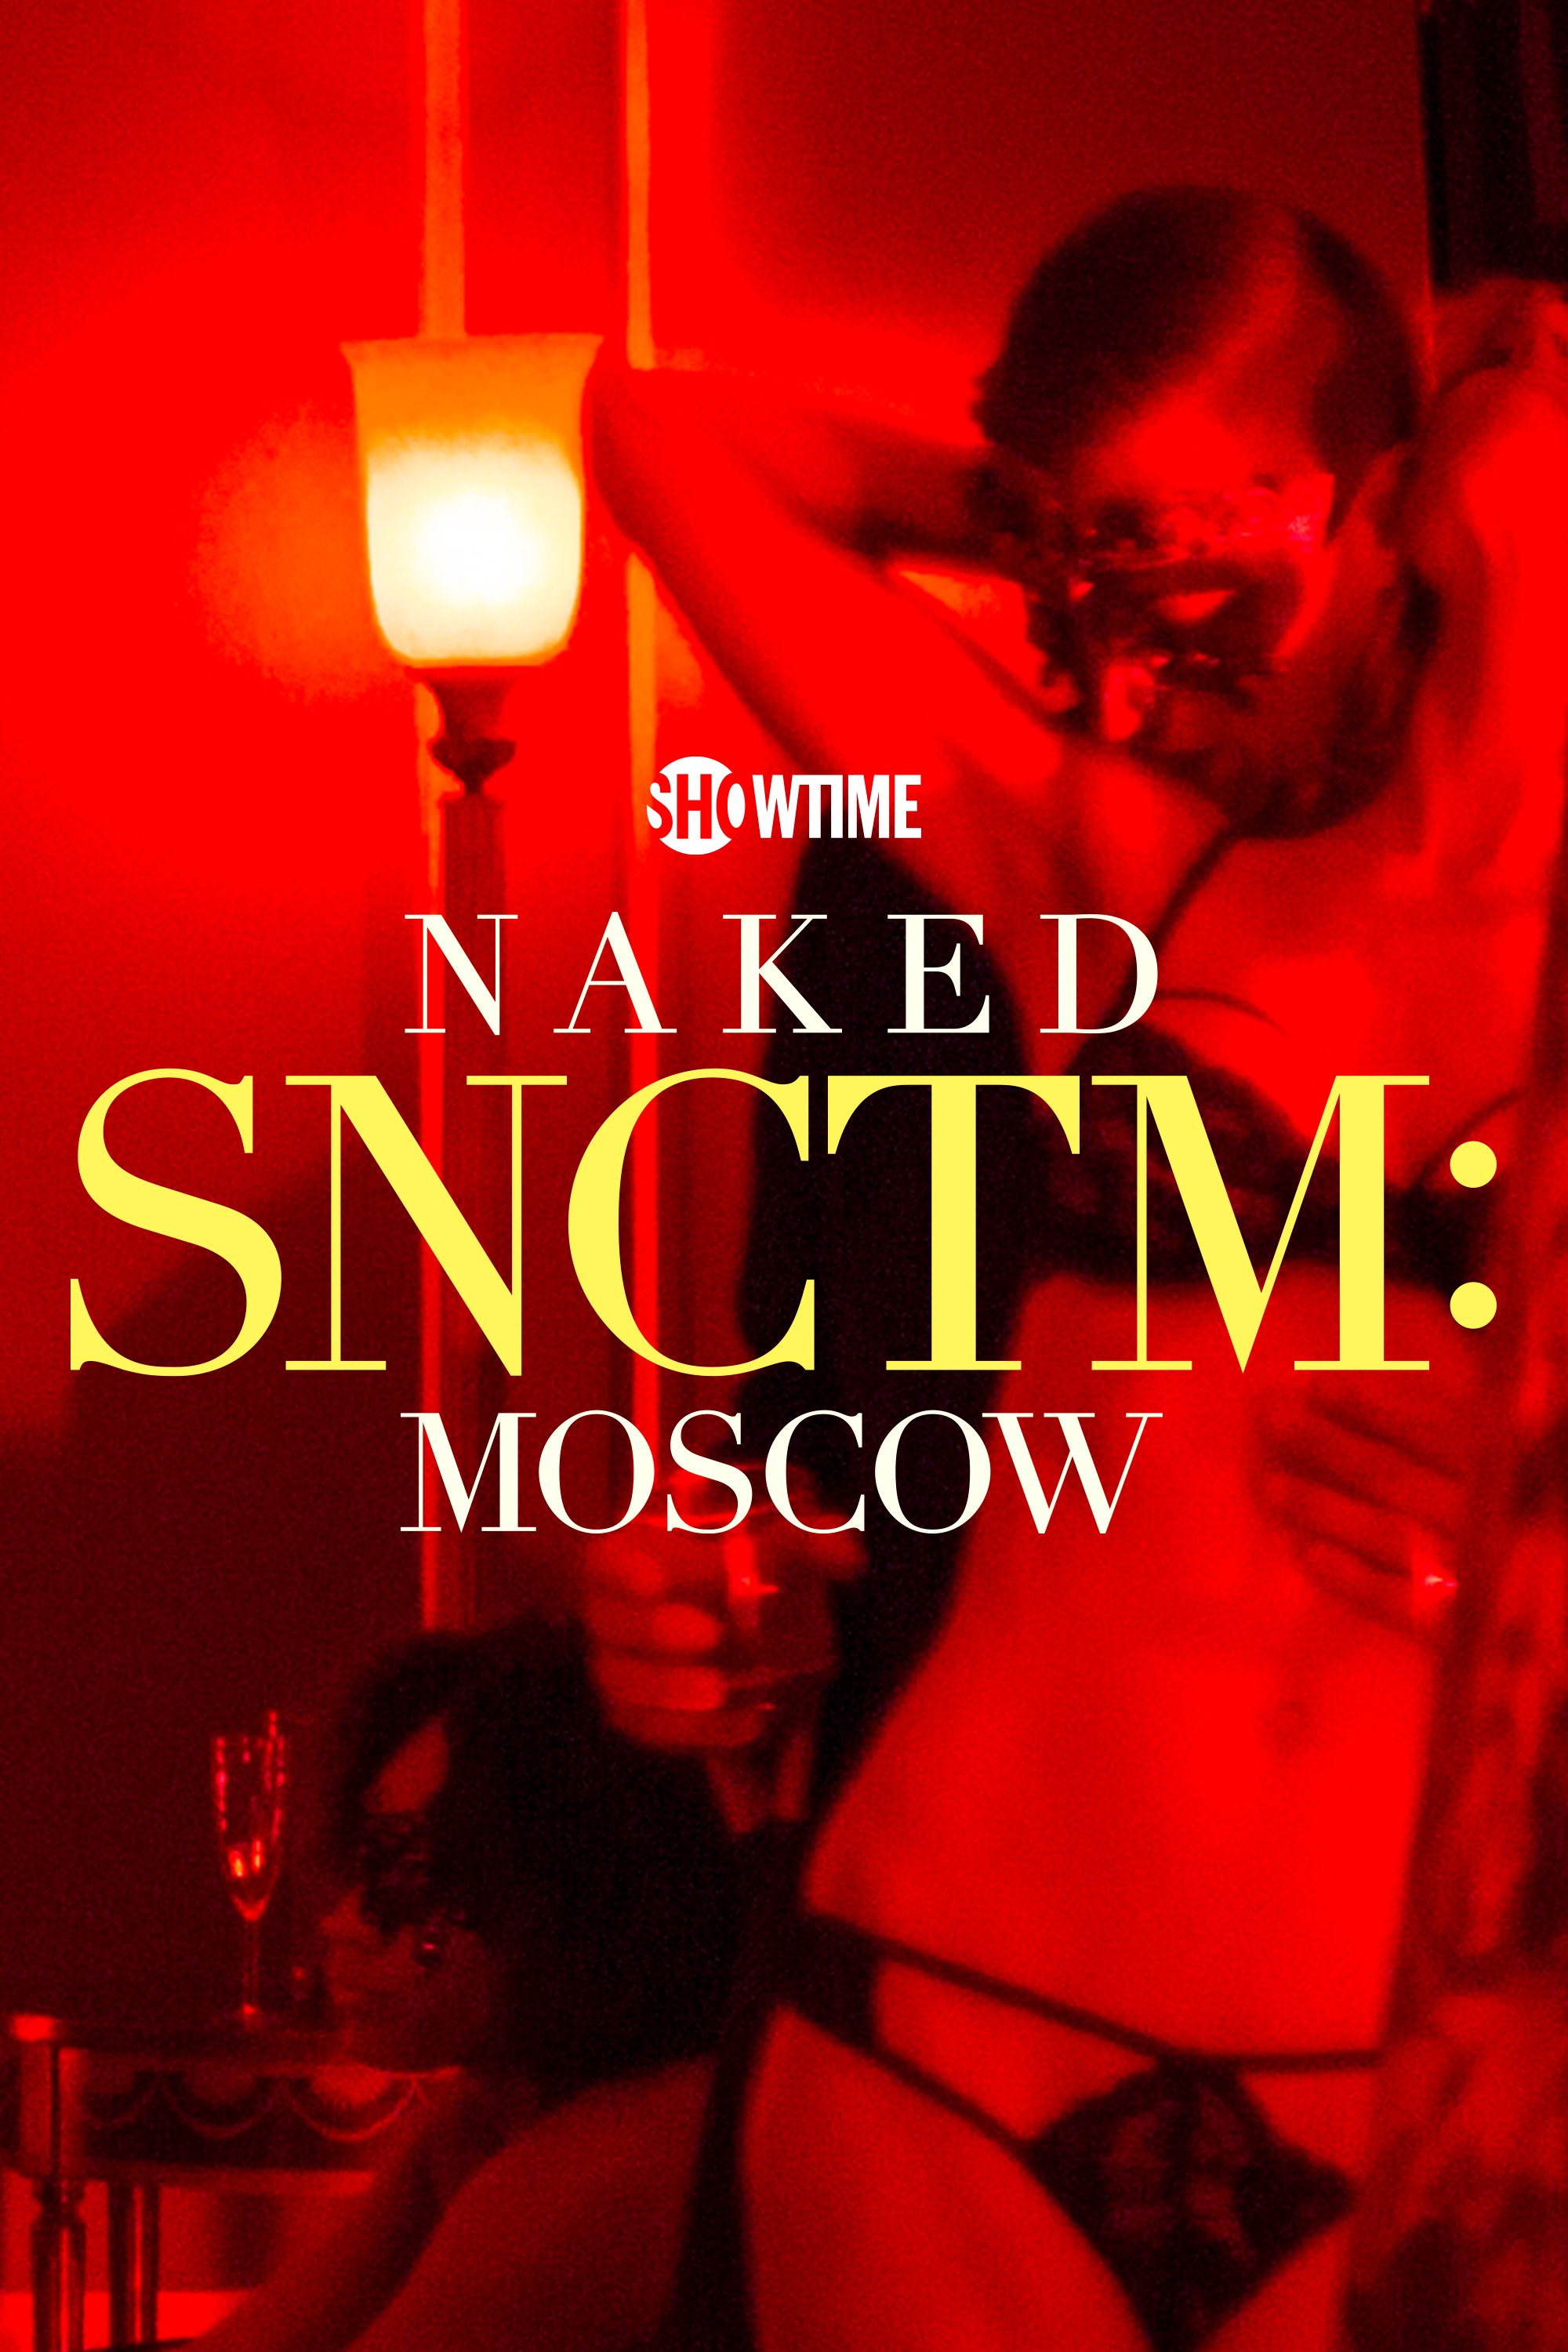 Naked Snctm